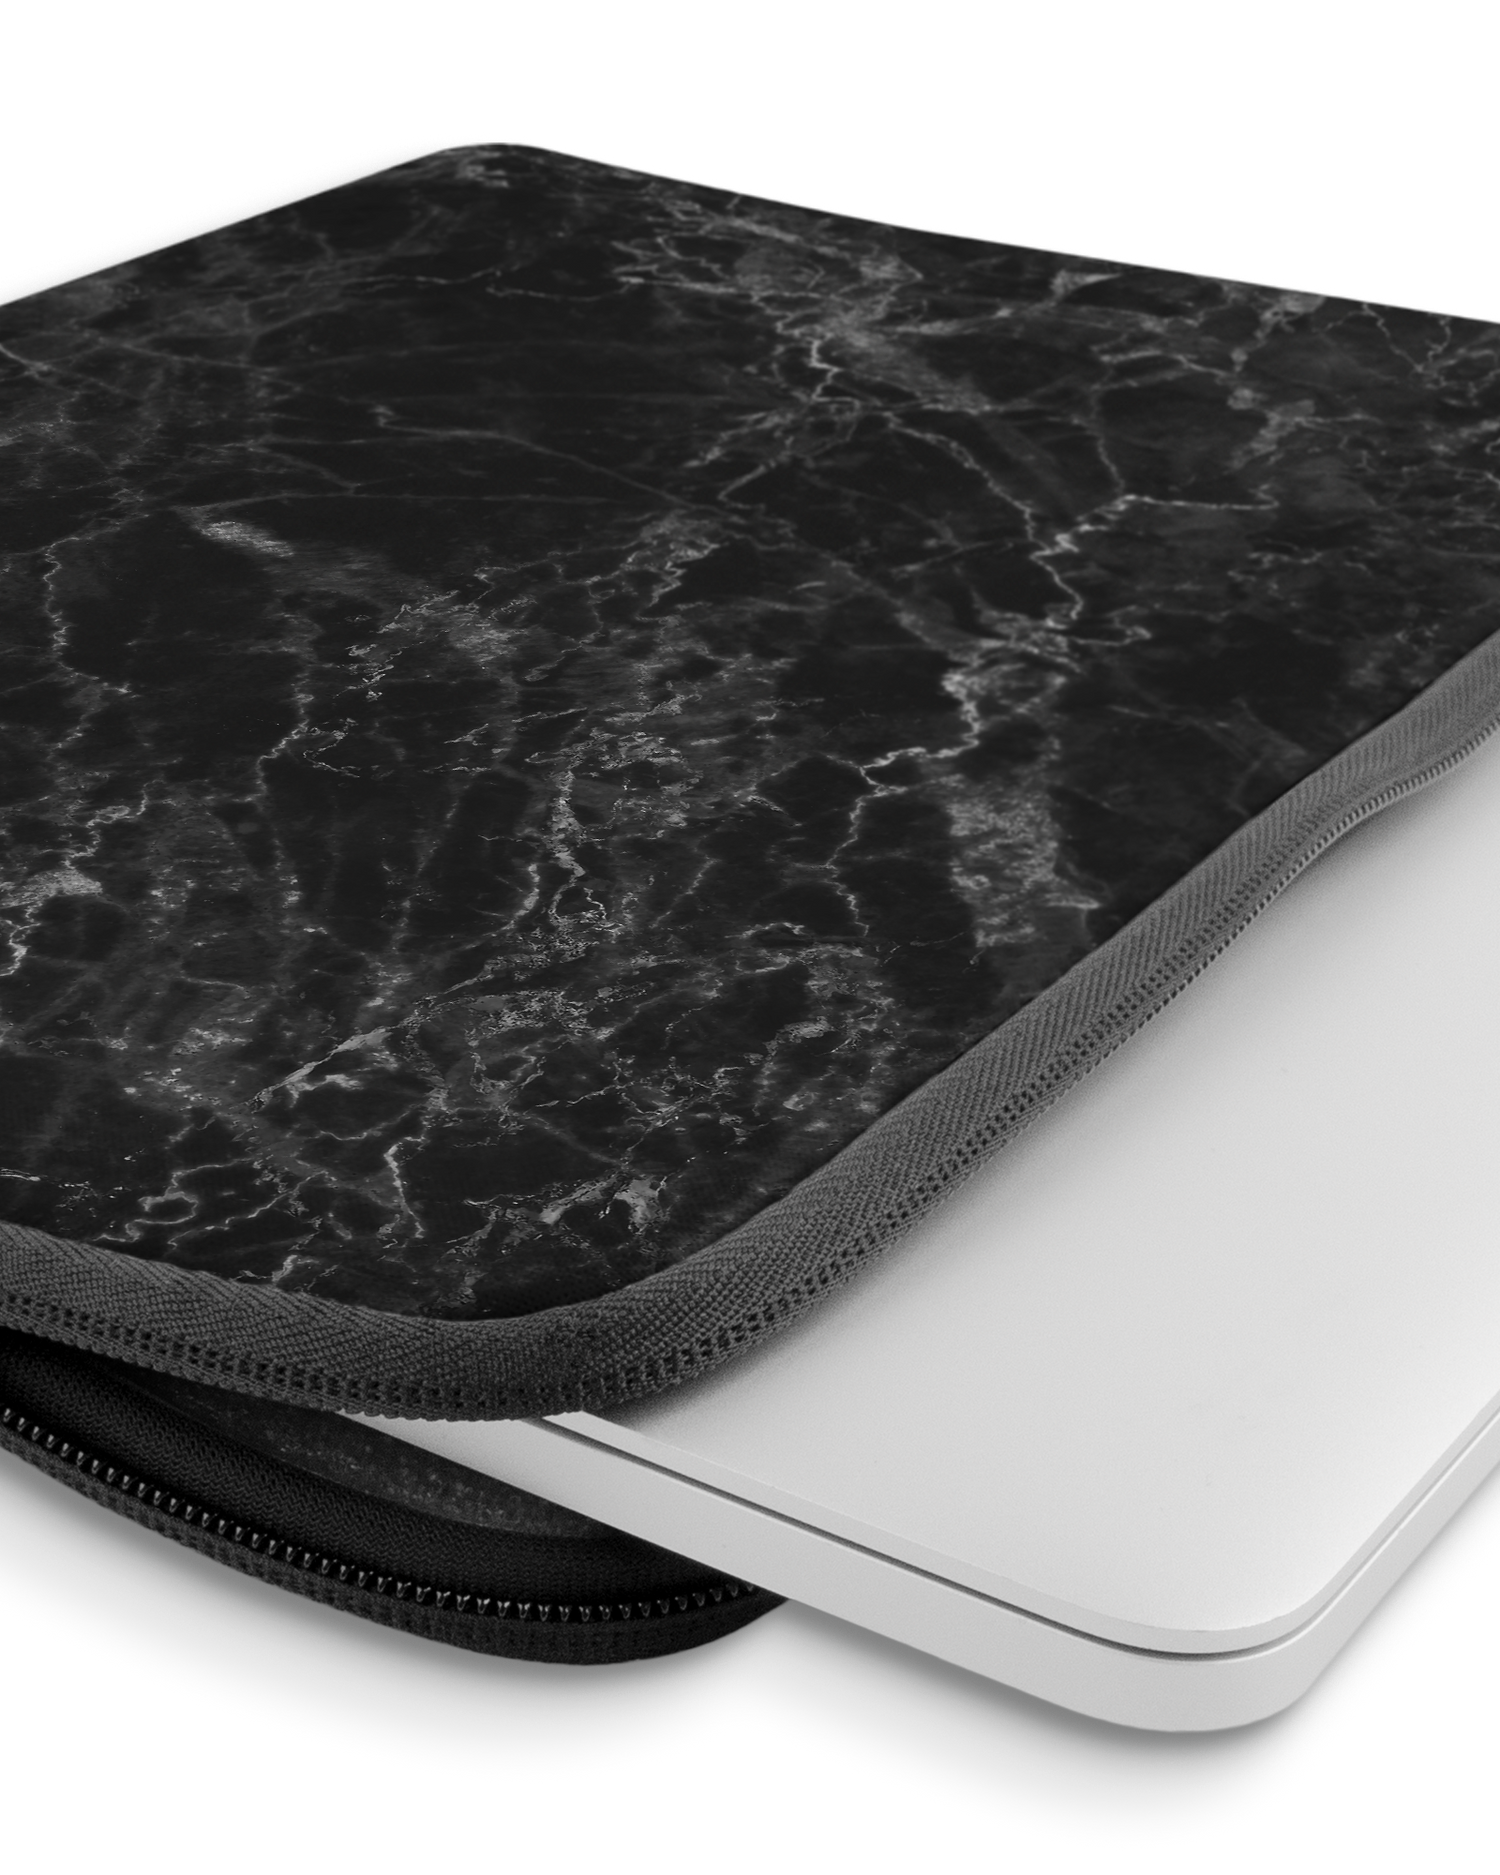 Midnight Marble Laptop Case 14 inch with device inside